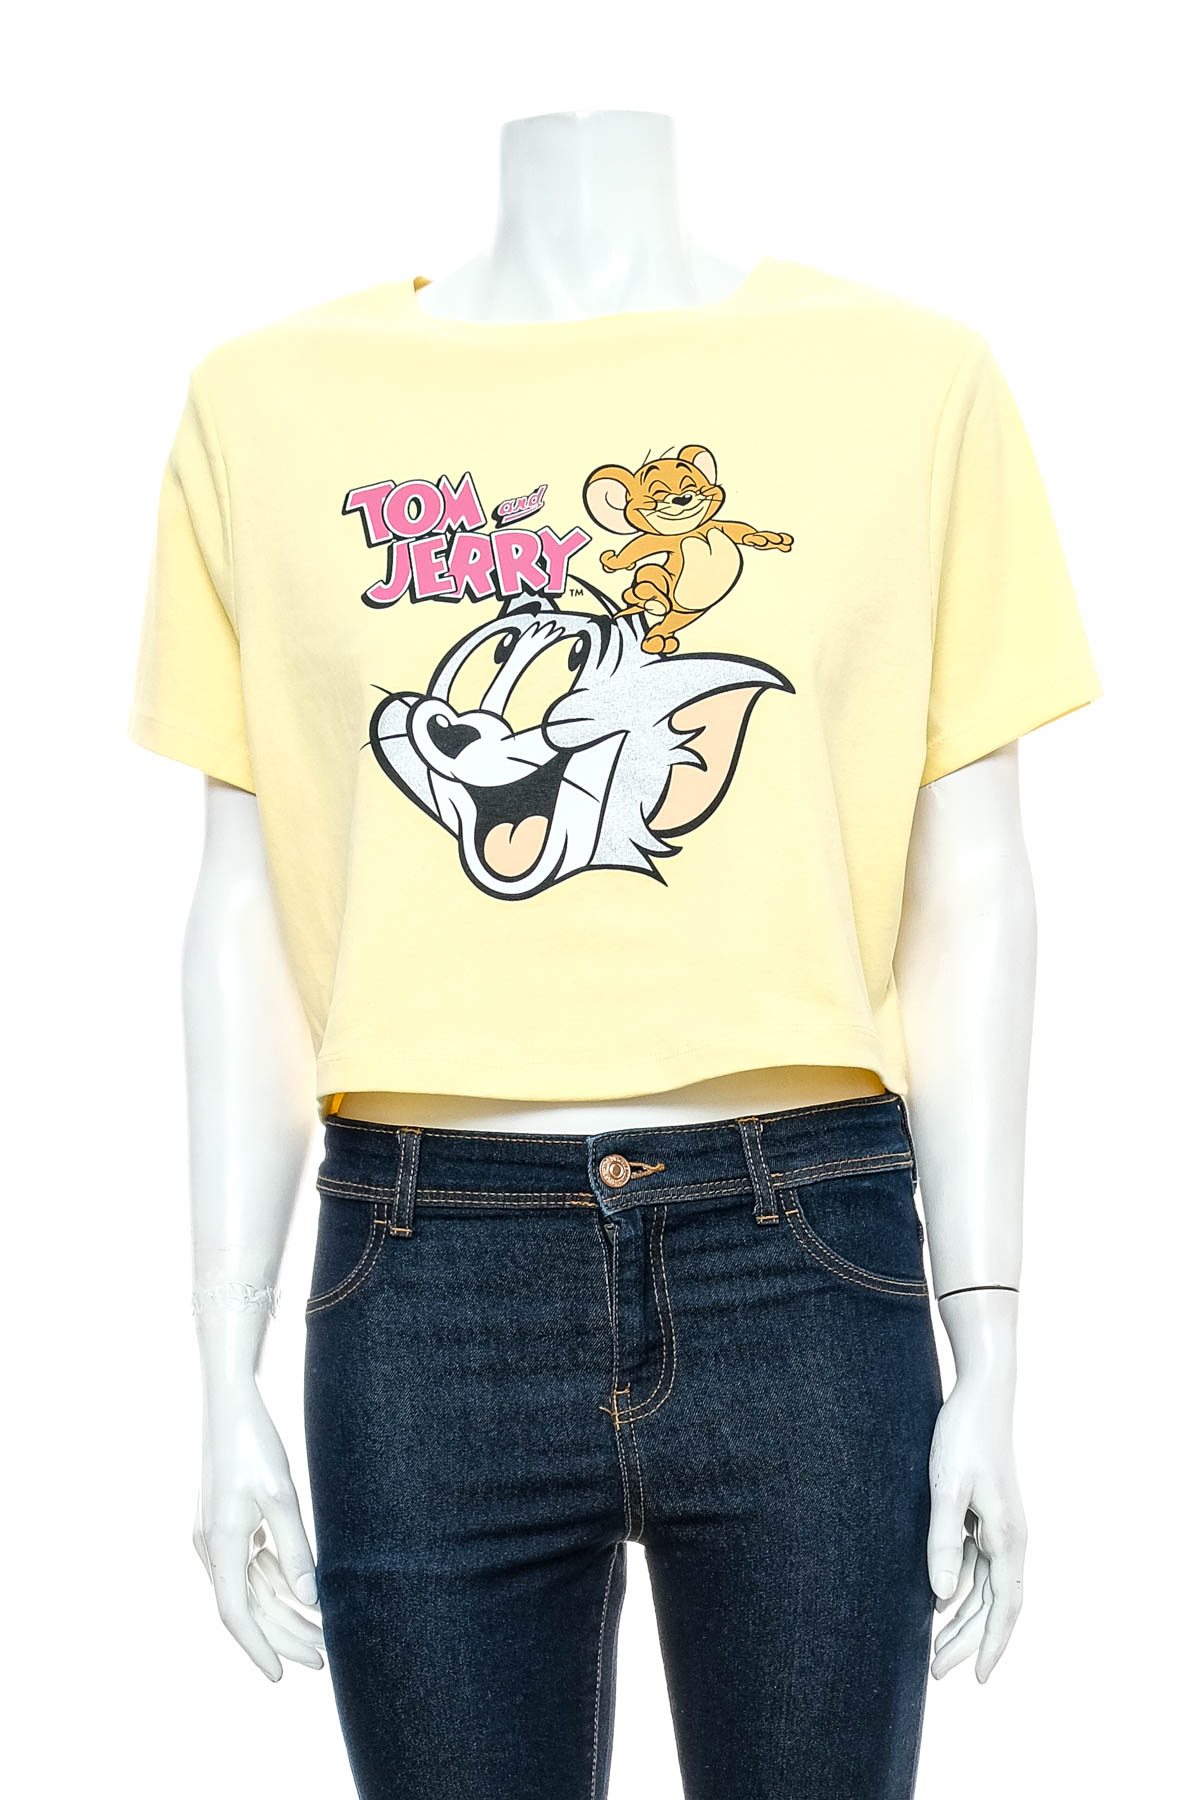 Women's t-shirt - Tom and Jerry - 0